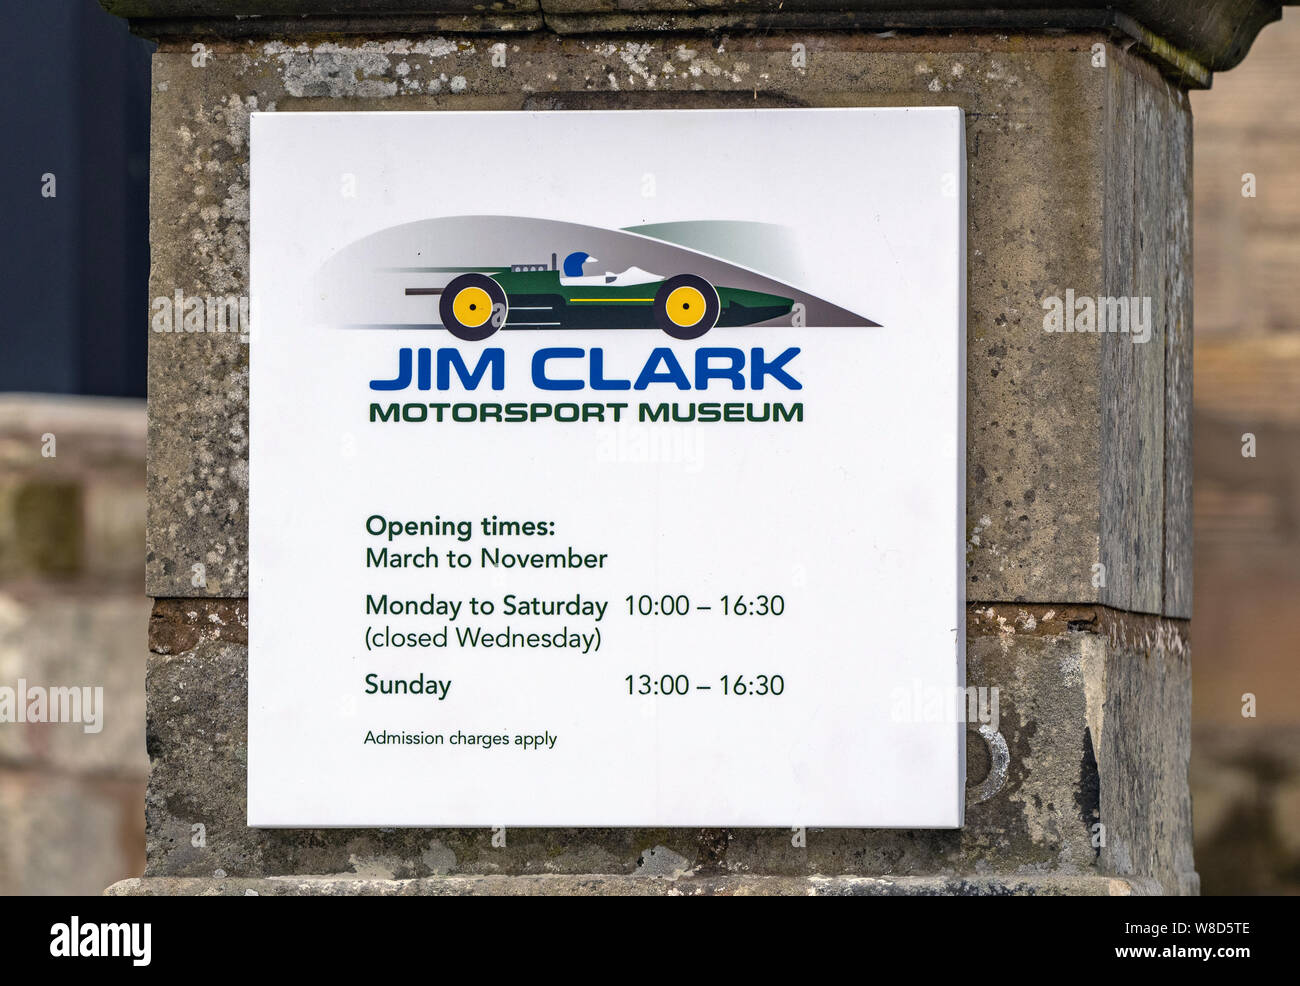 The Jim Clark Motorsport Museum in the market town of Duns in the Scottish Borders is dedicated to the life and motor racing career of Jim Clark. Stock Photo